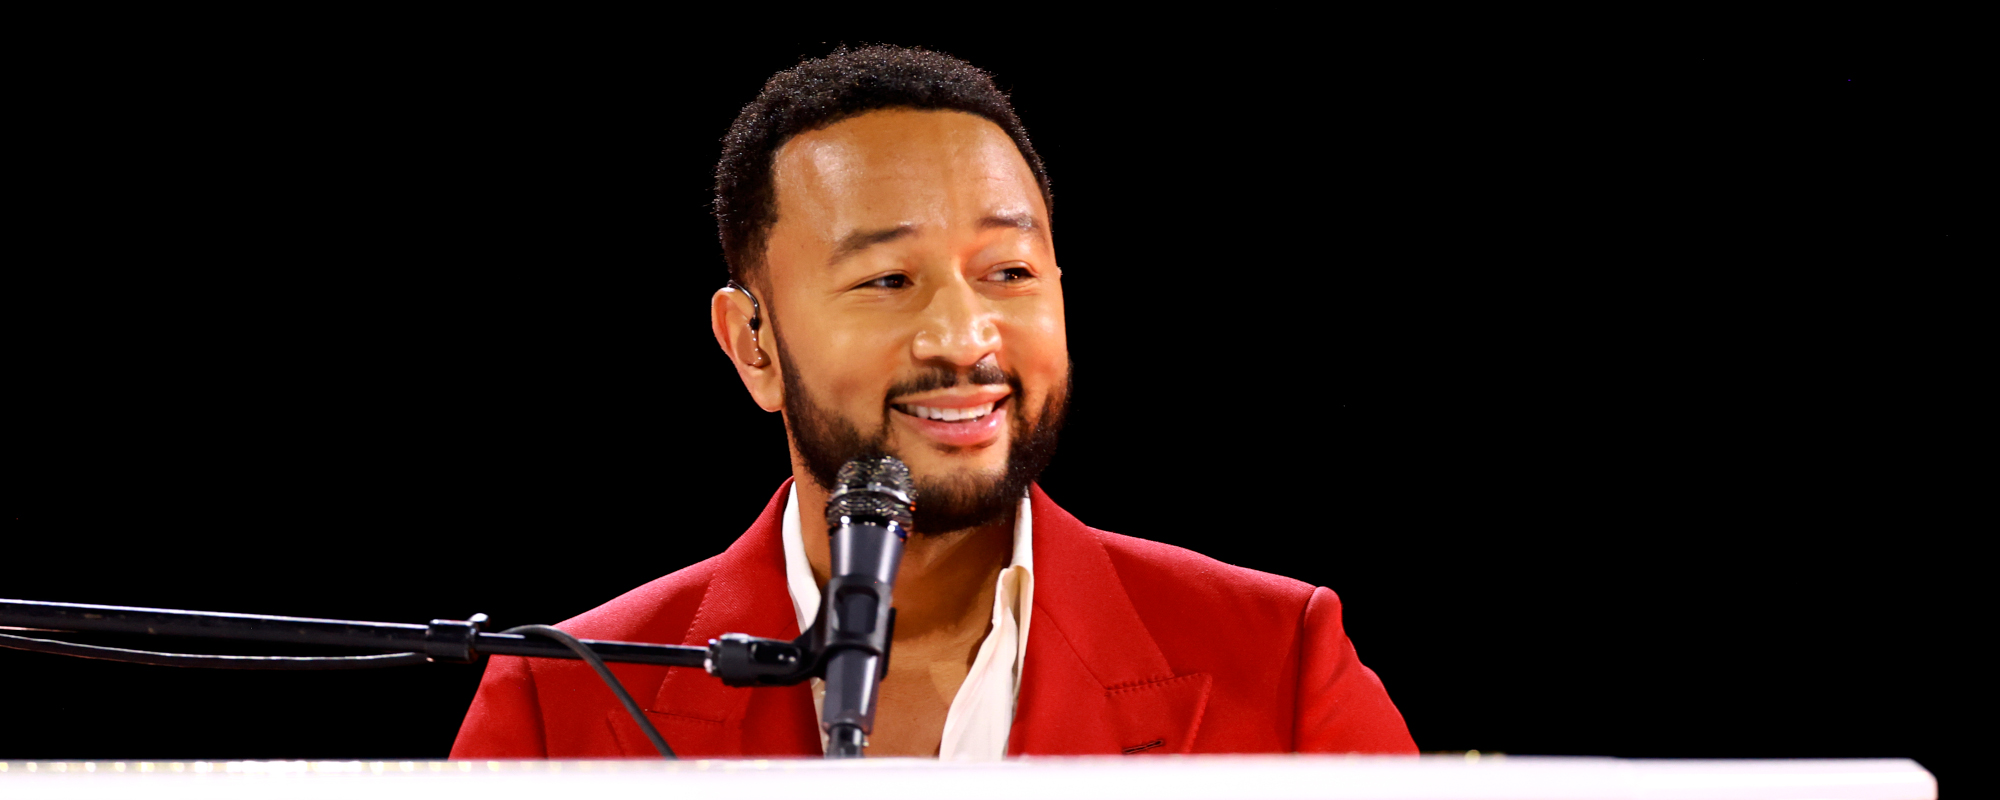 7 Iconic Albums You Didn’t Know Feature John Legend